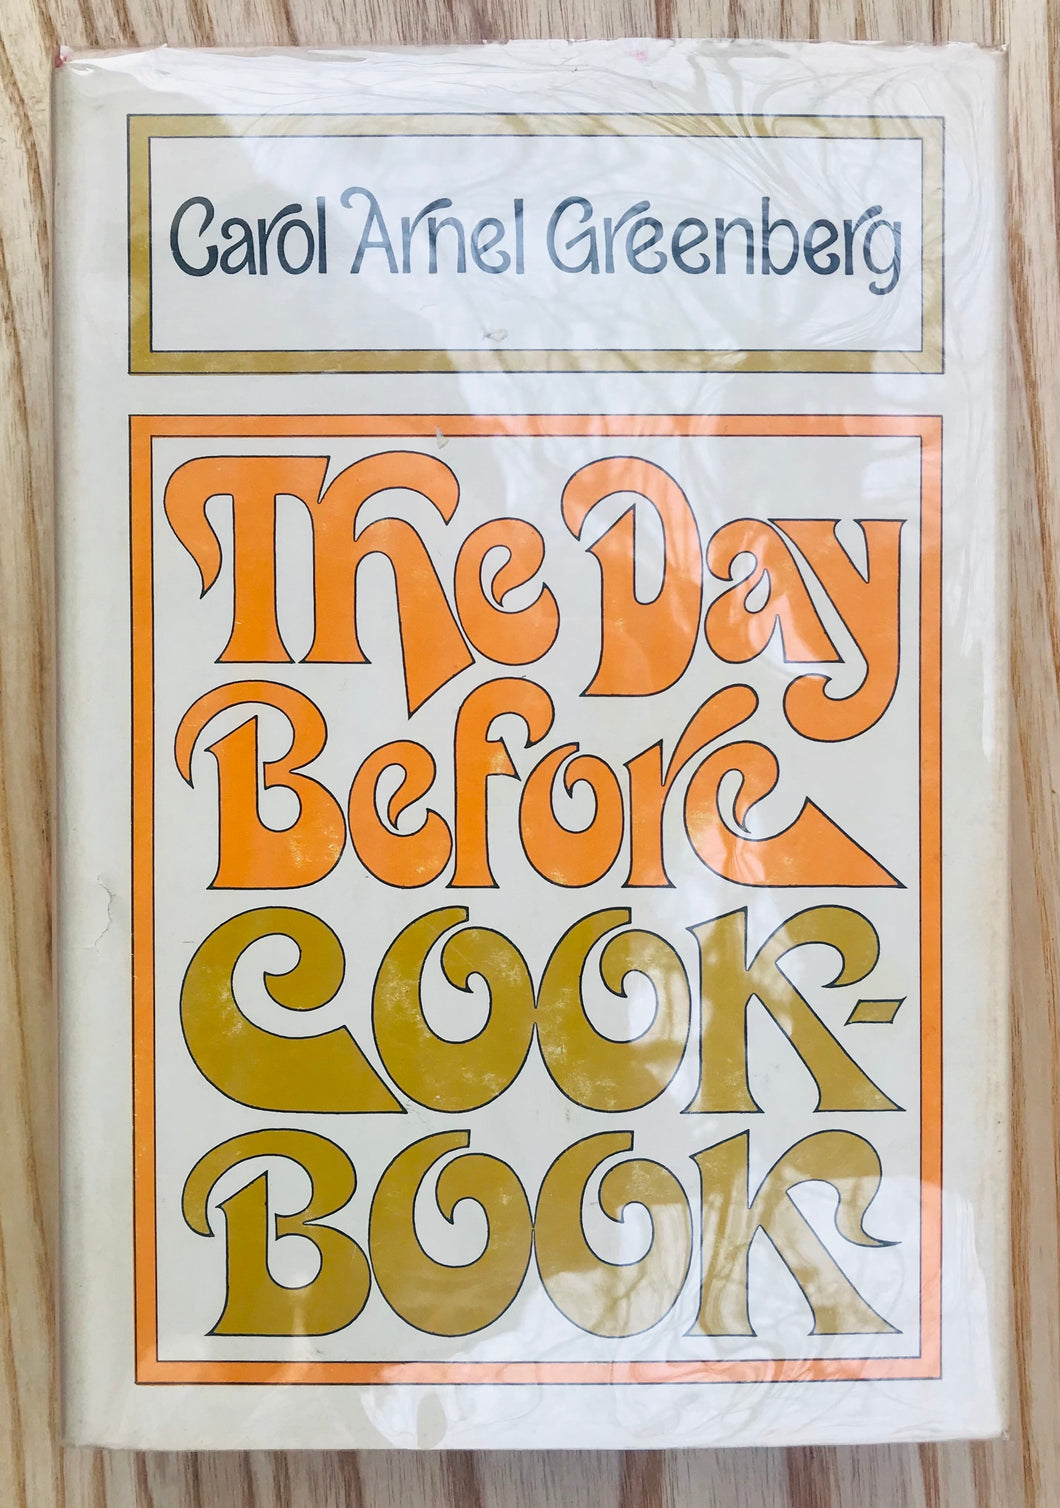 The Day Before Cookbook by Carol Arnel. Greenberg